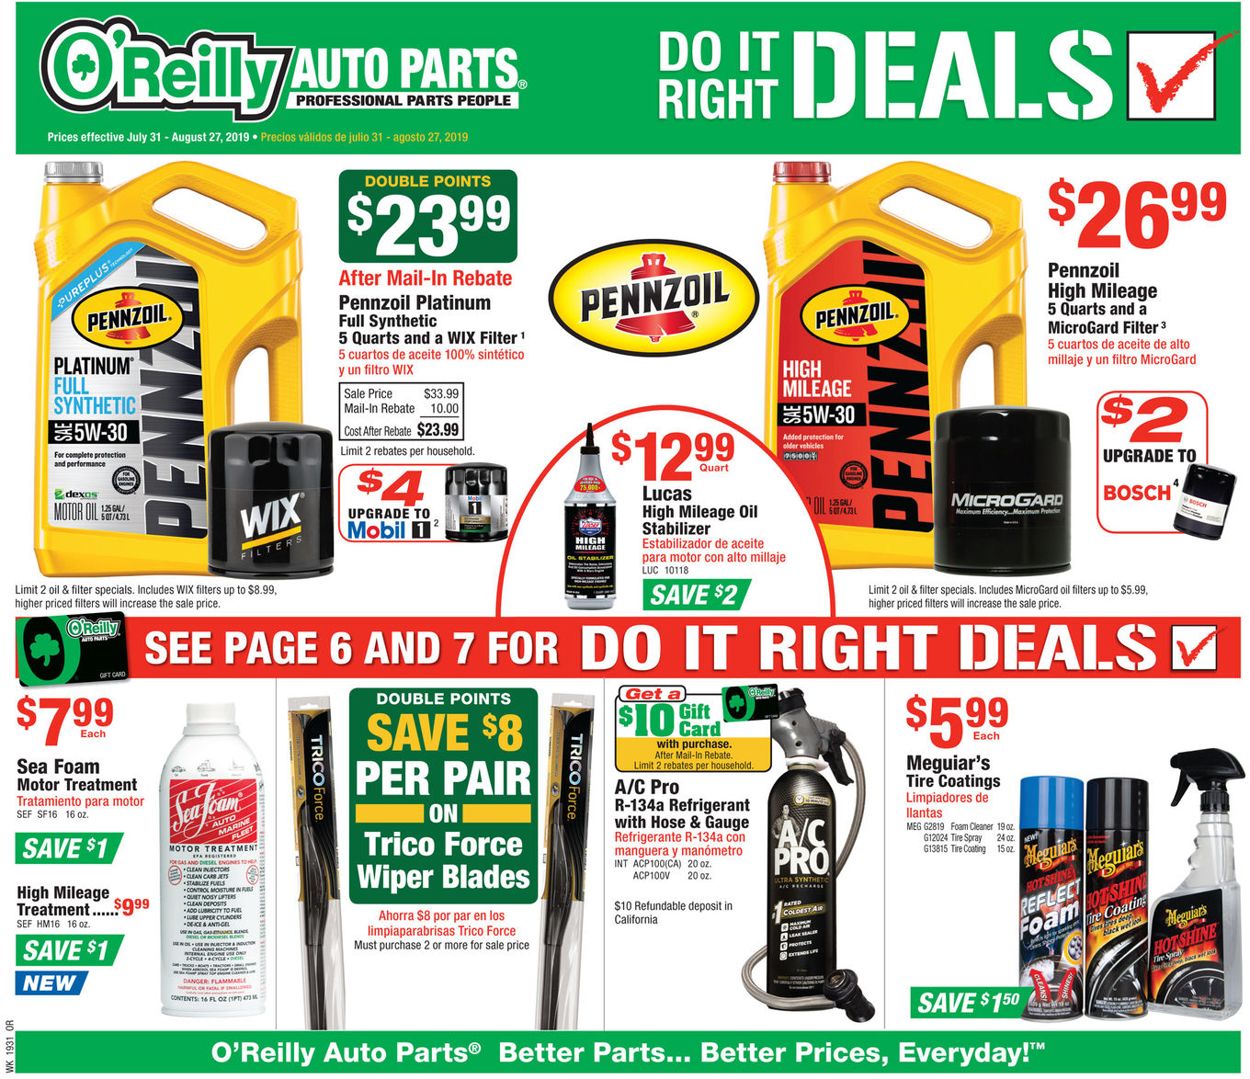 o-reilly-auto-parts-current-weekly-ad-03-25-04-28-2020-12